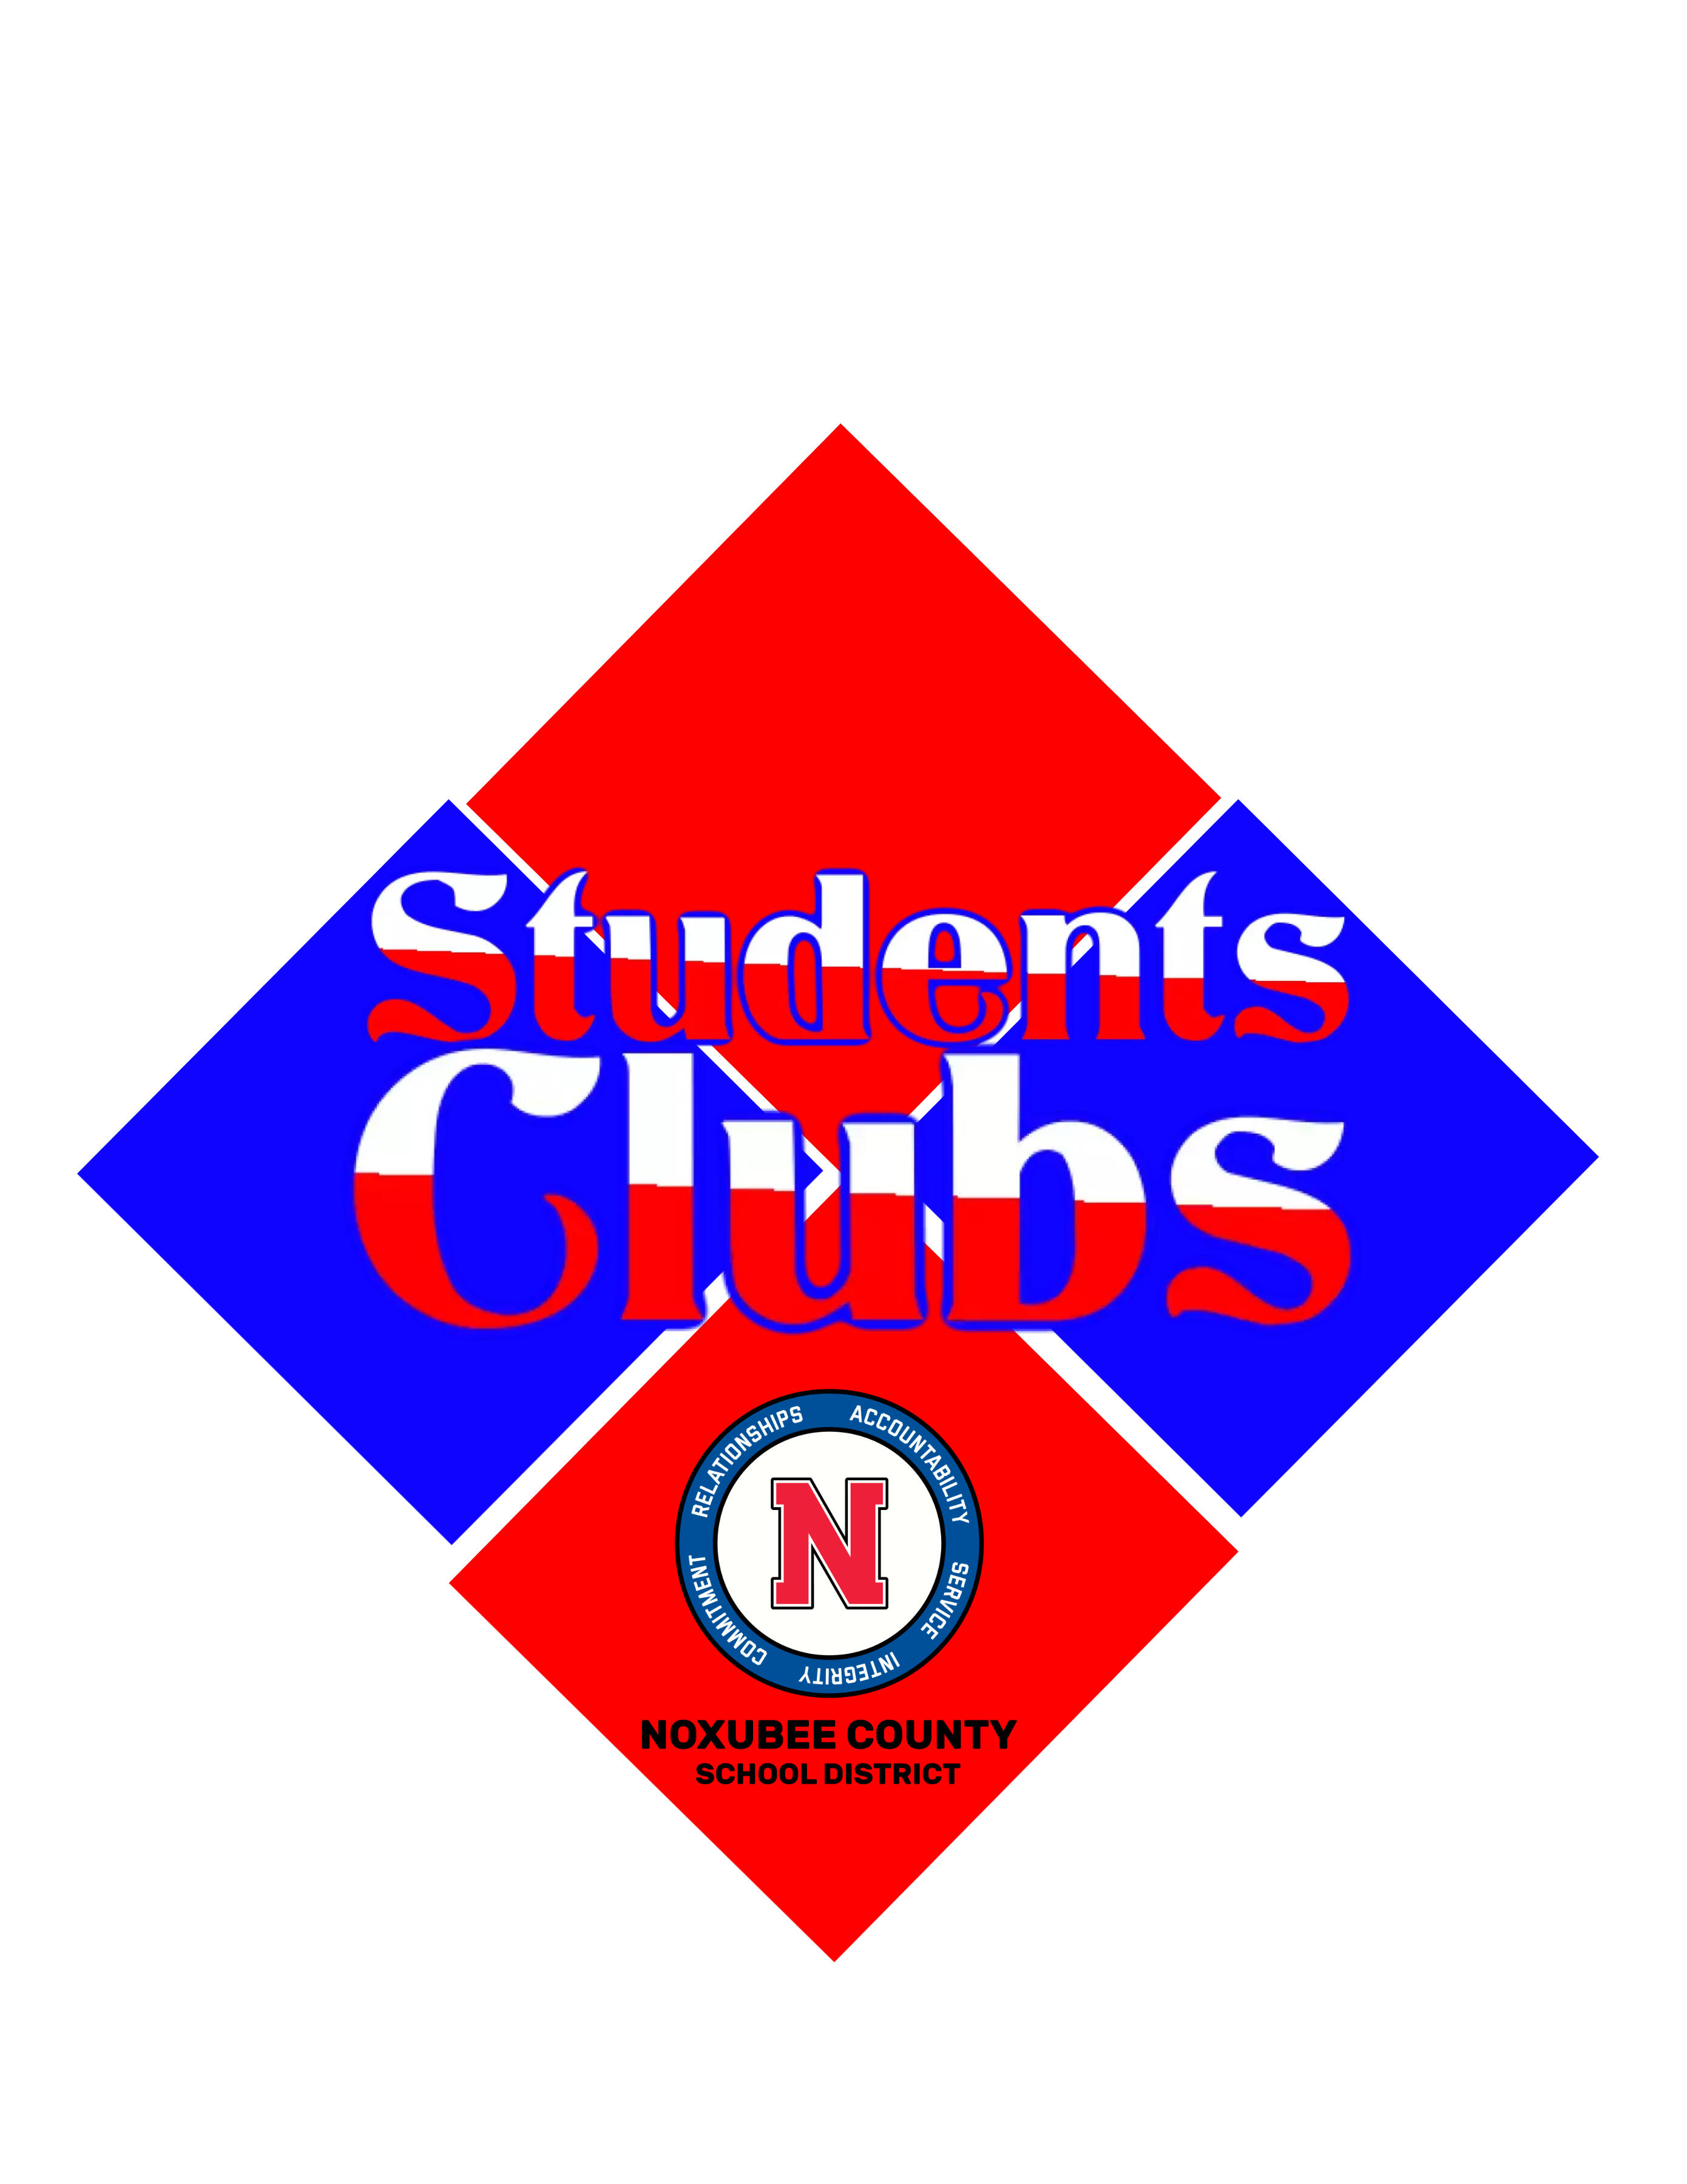 Students Clubs